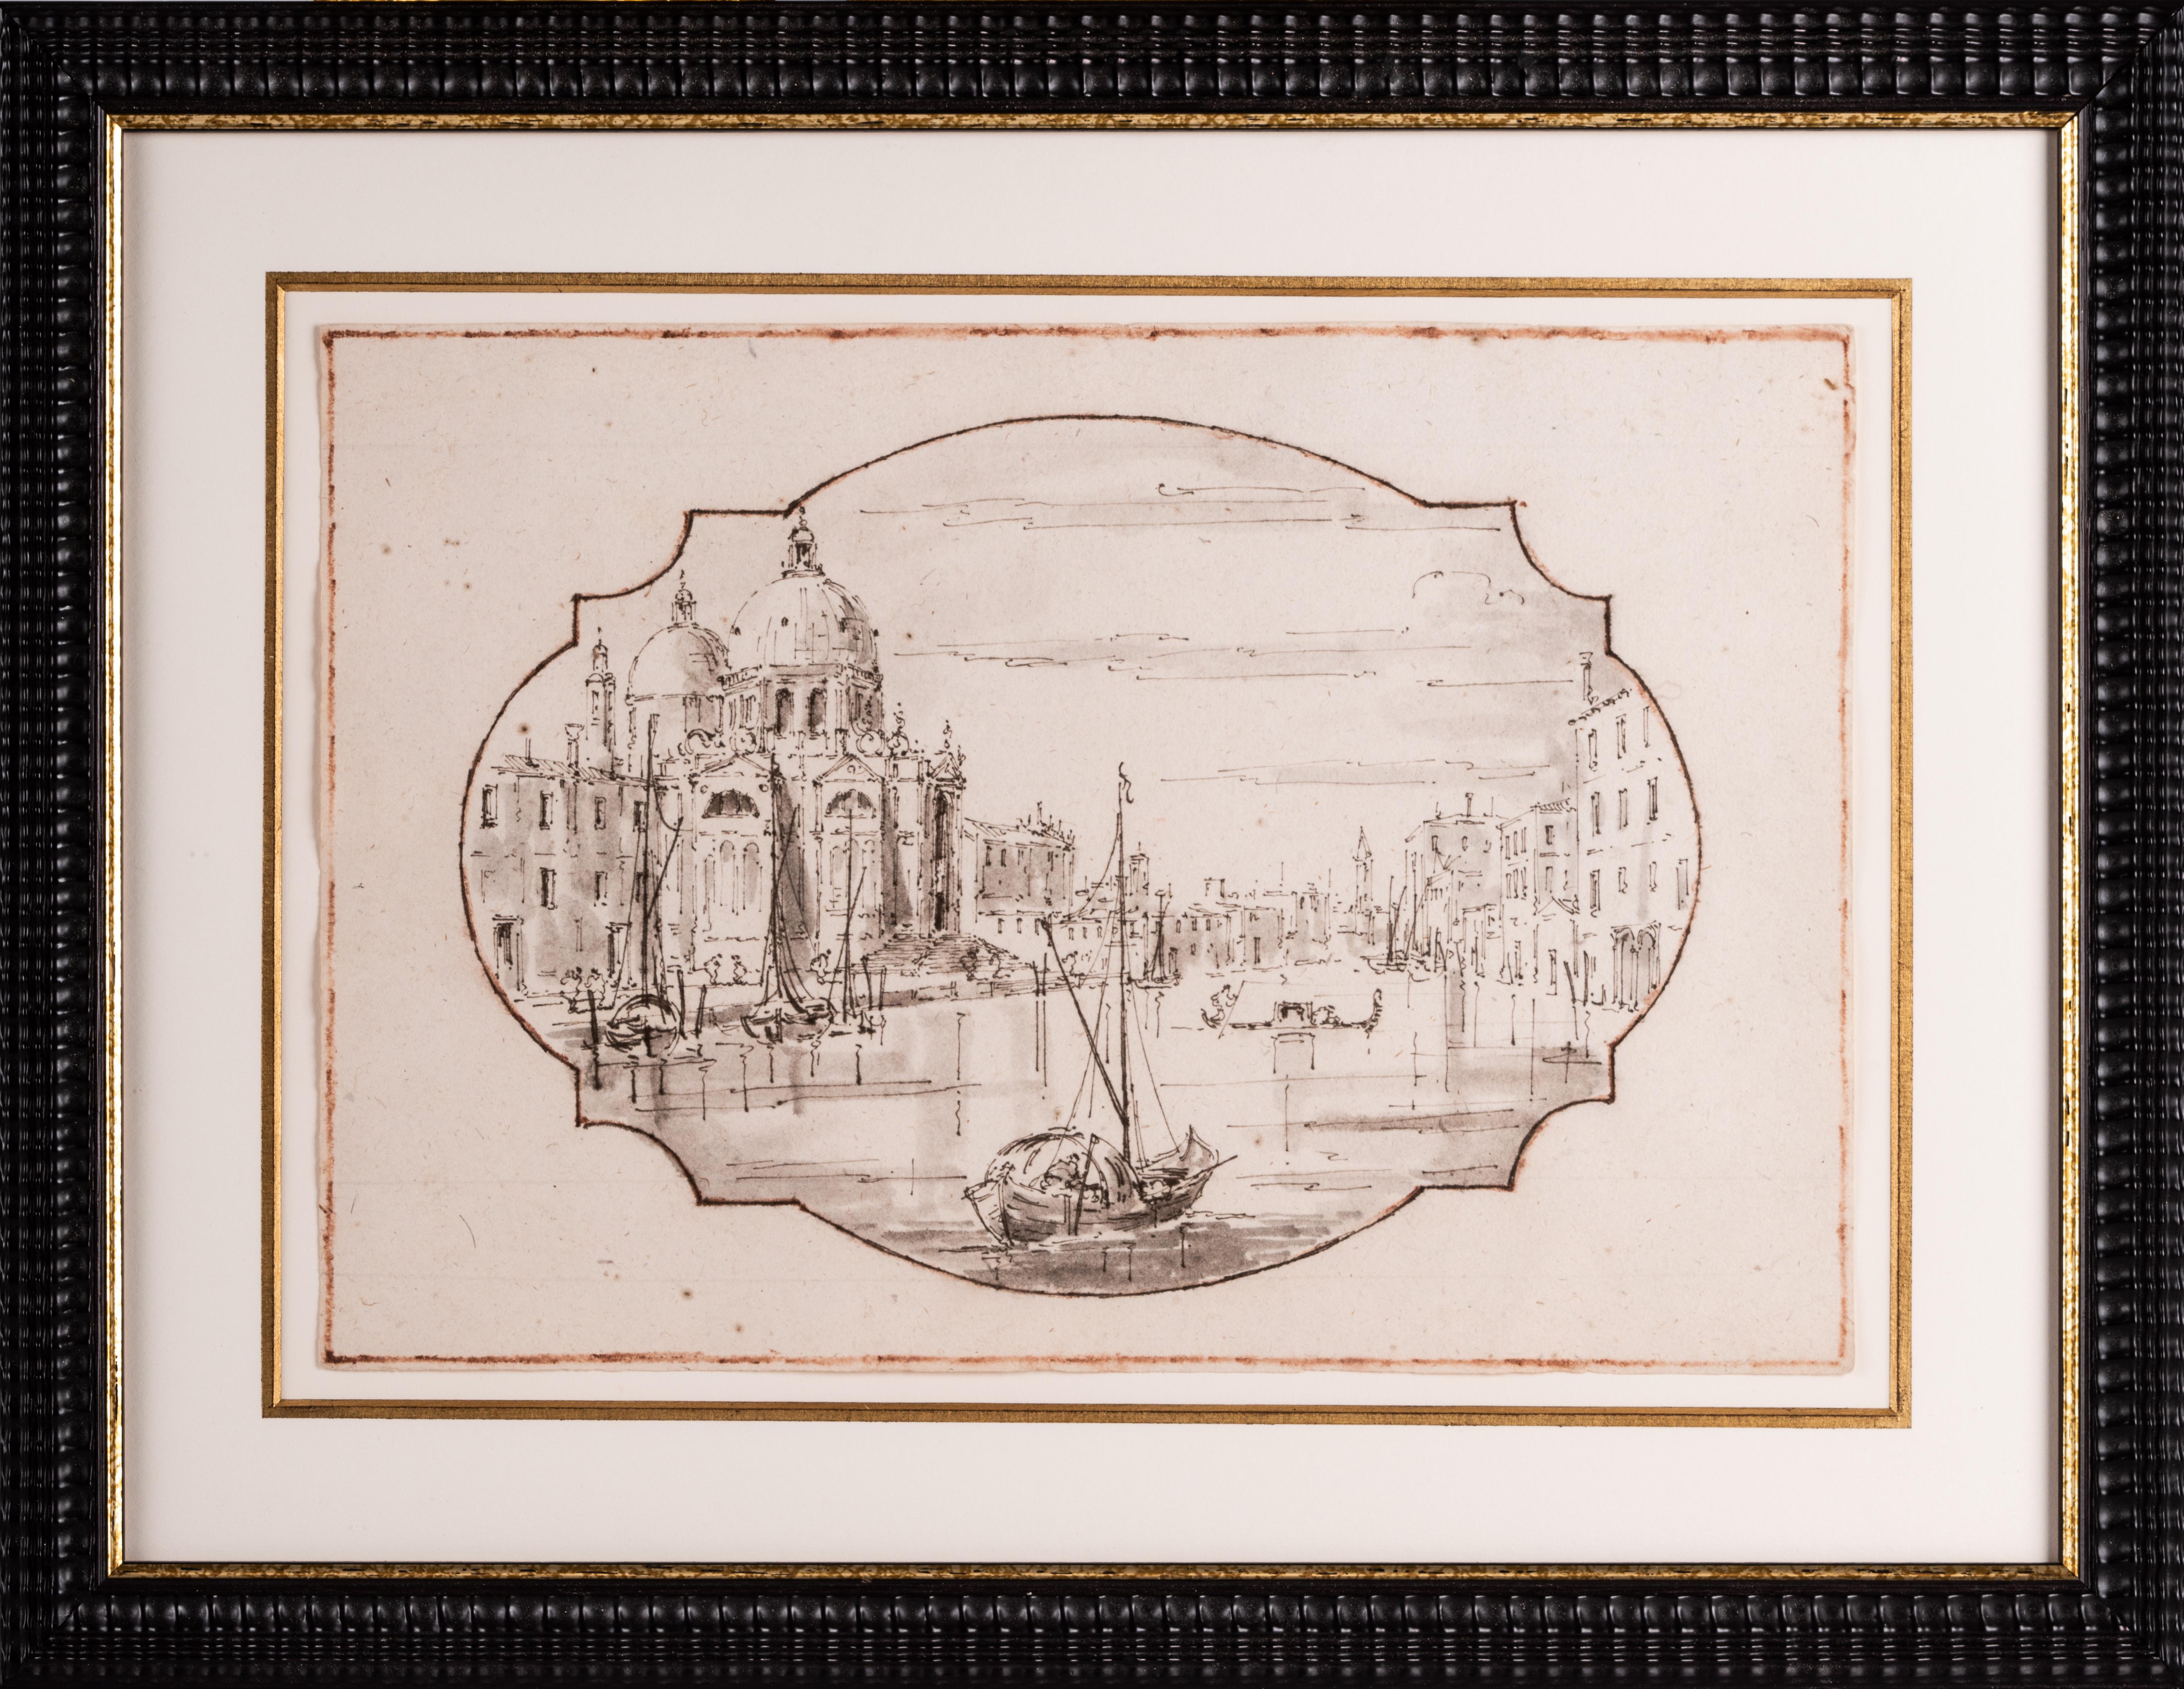 Drawings, one representing San Geremia on the Grand Canal, the other La Salute on the Grand Canal. Both drawings are in a style evocative of Francesco Guardi (1712-1793) specialist of Venetians 'vedute'. Guardi's style can best be described as free